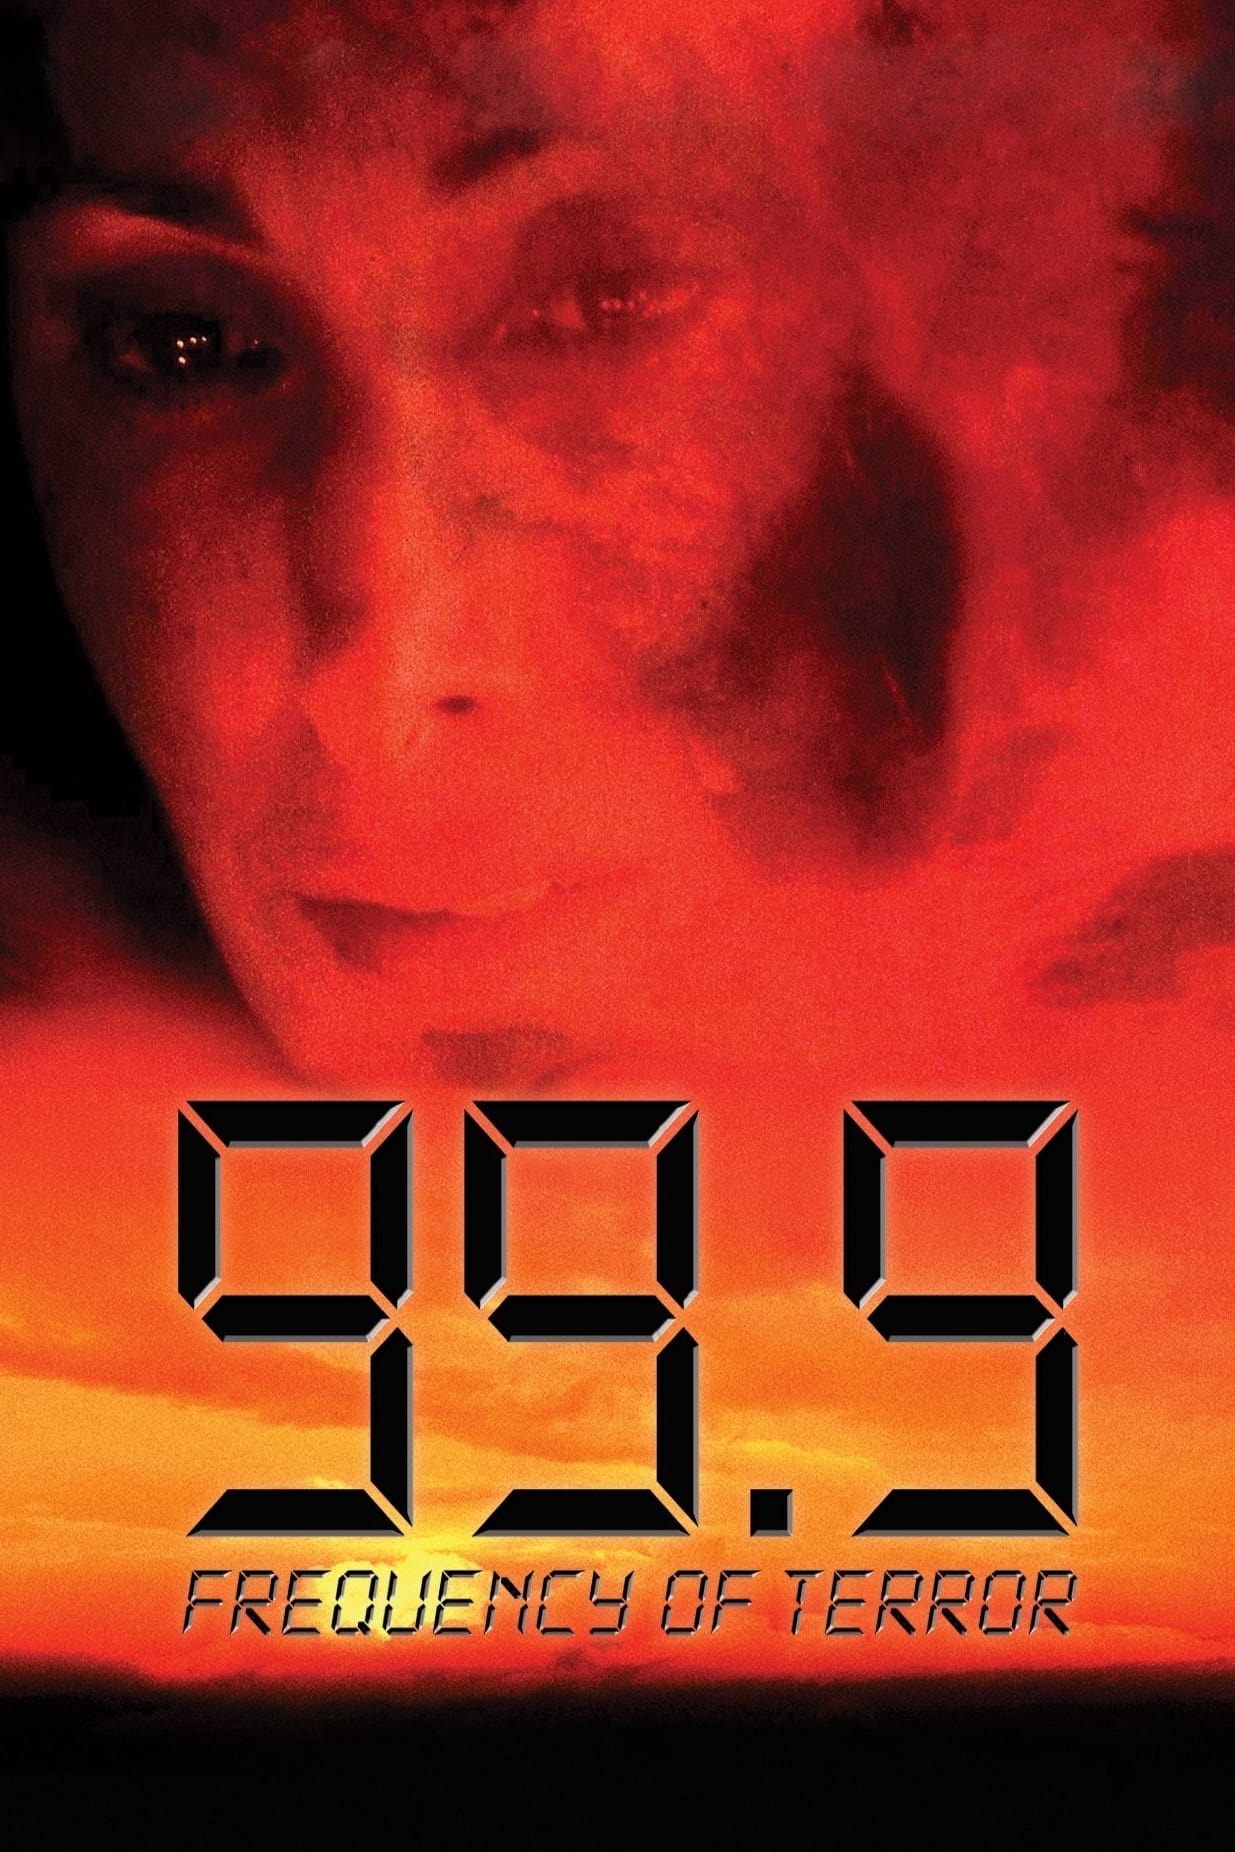 99.9: The Frequency of Terror (1997)